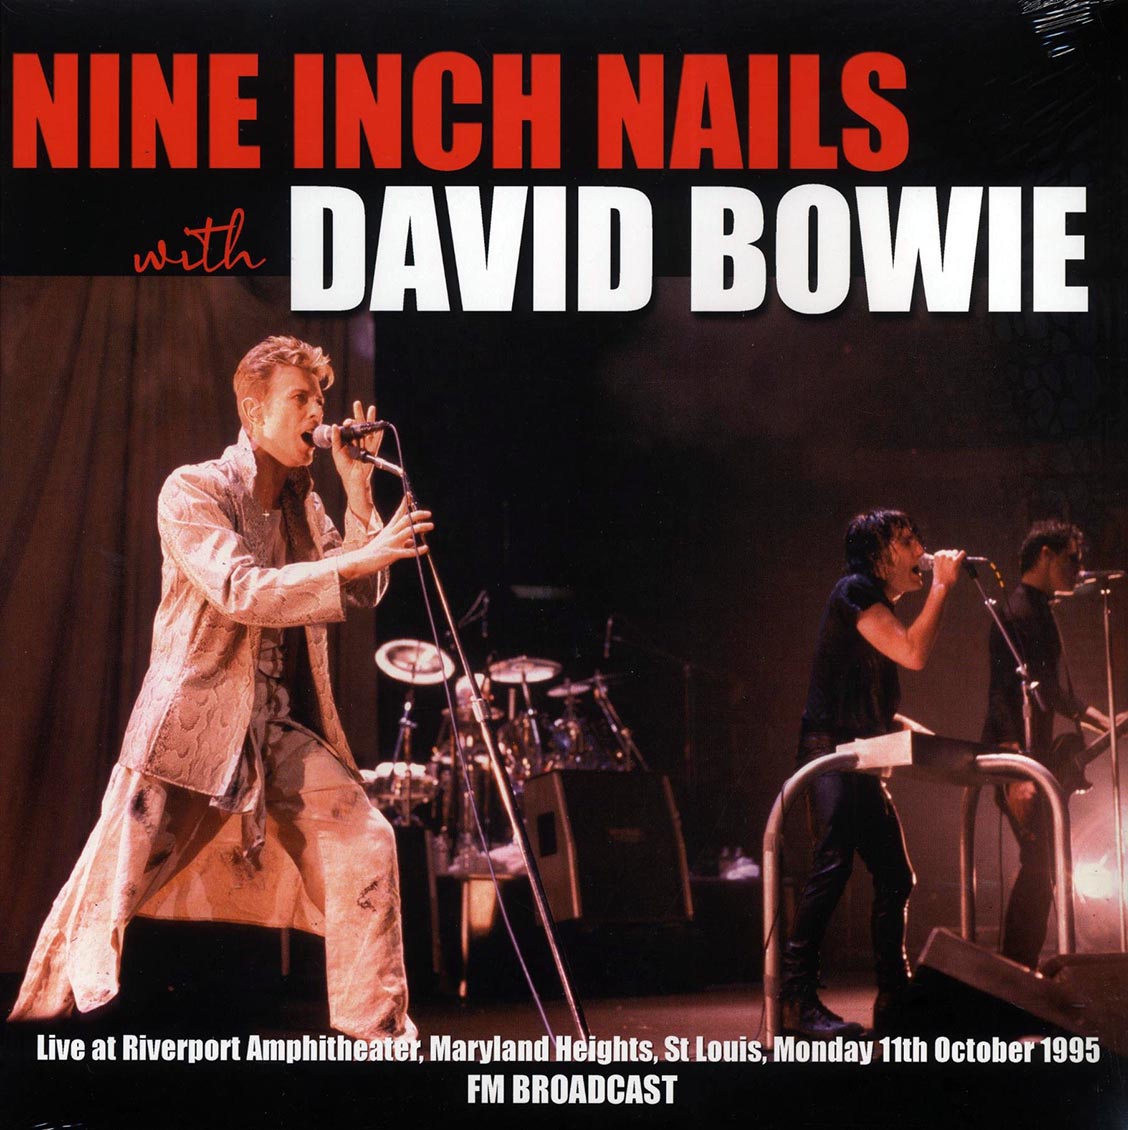 Nine Inch Nails, David Bowie - Live At Riverfront Amphitheater, Maryland Heights, St. Louis, Monday 11th October 1995 FM Broadcast (ltd. 500 copies made) (2xLP) - Vinyl LP